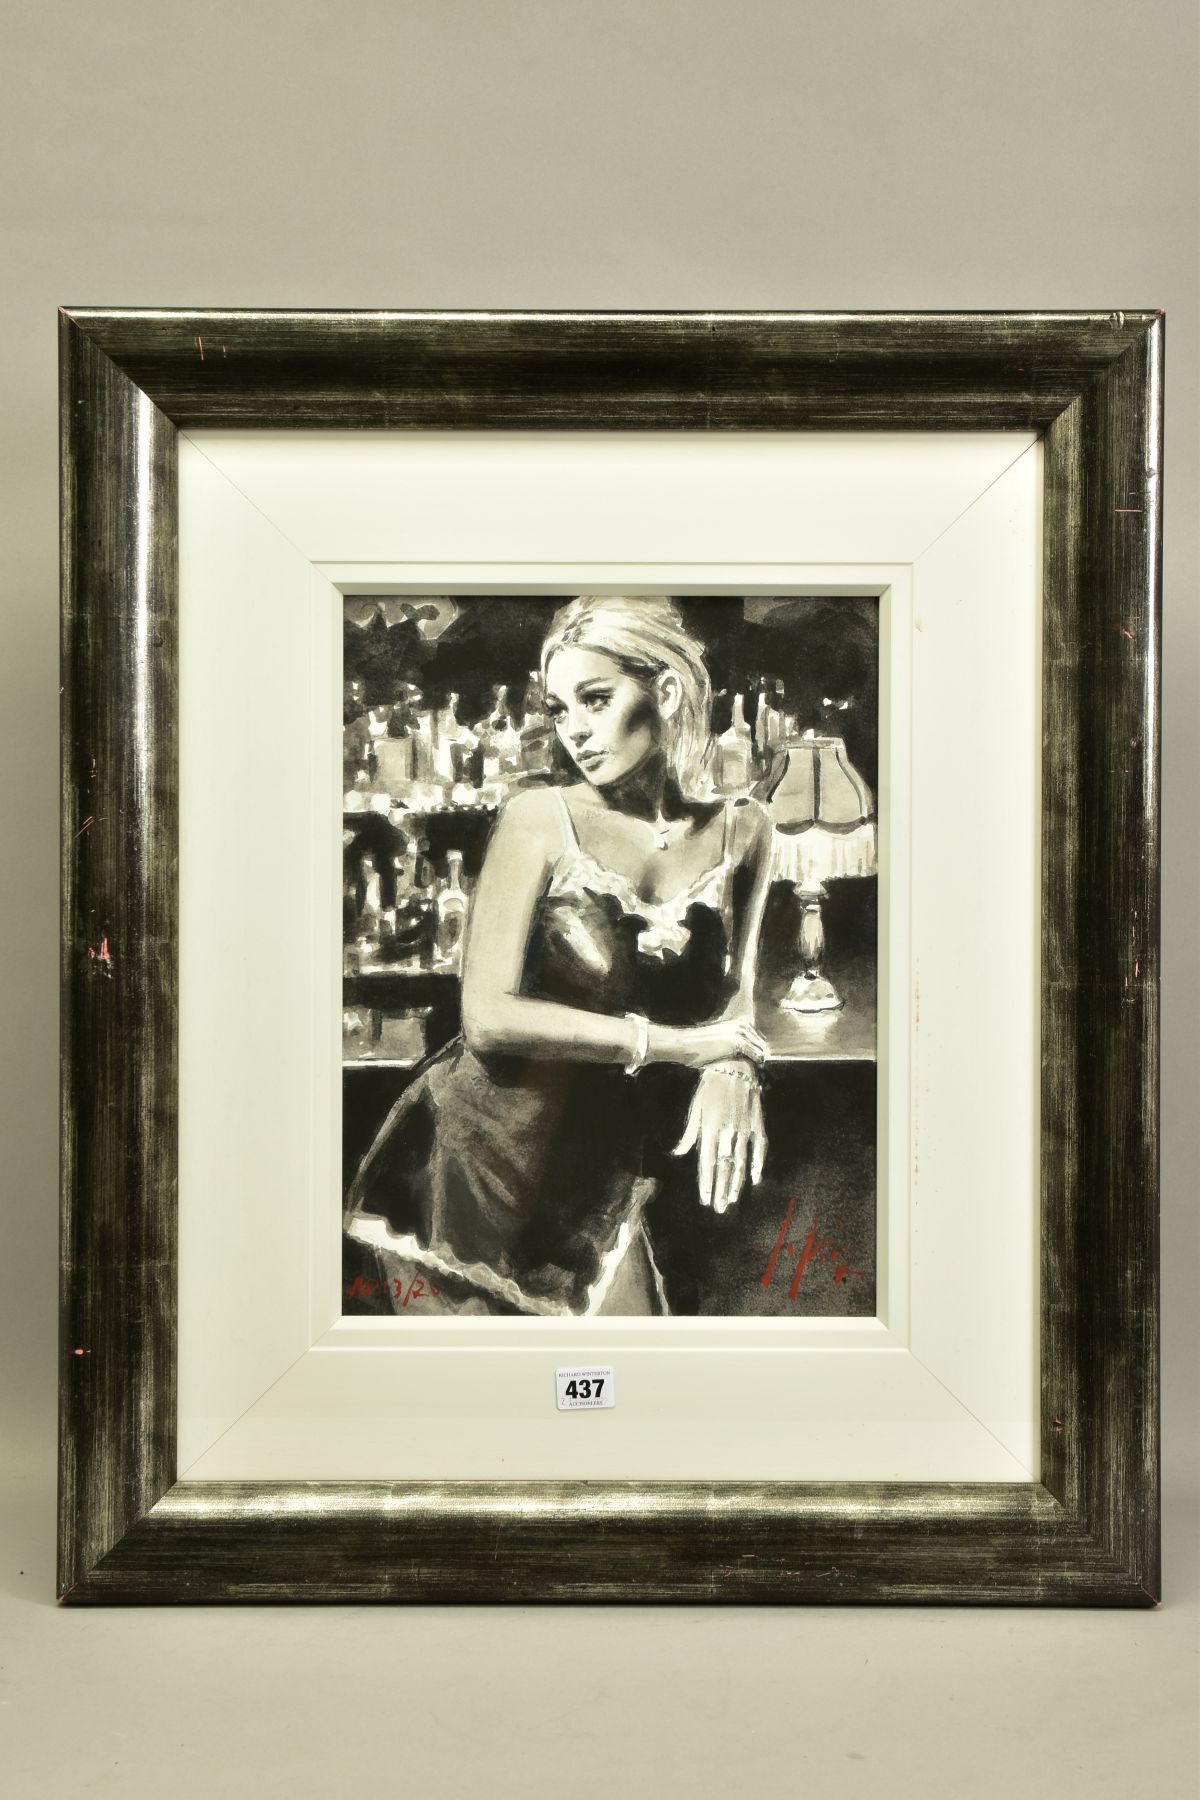 FABIAN PEREX (ARGENTINA 1967) 'ENGLISH ROSE VII', a signed artist proof, monochrome print of a